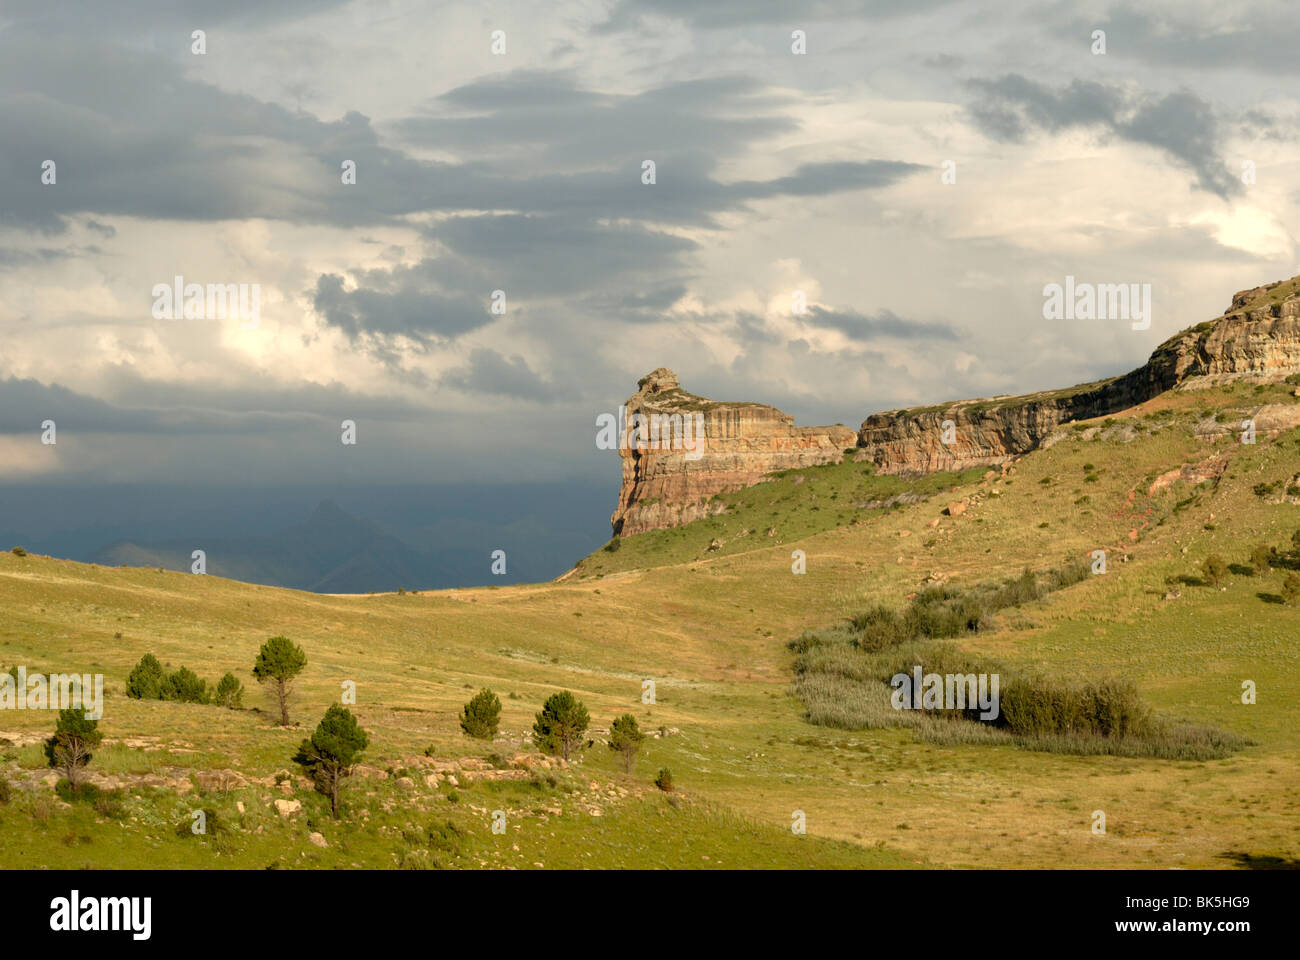 Landscape near Clarens, South Africa, Africa Stock Photo